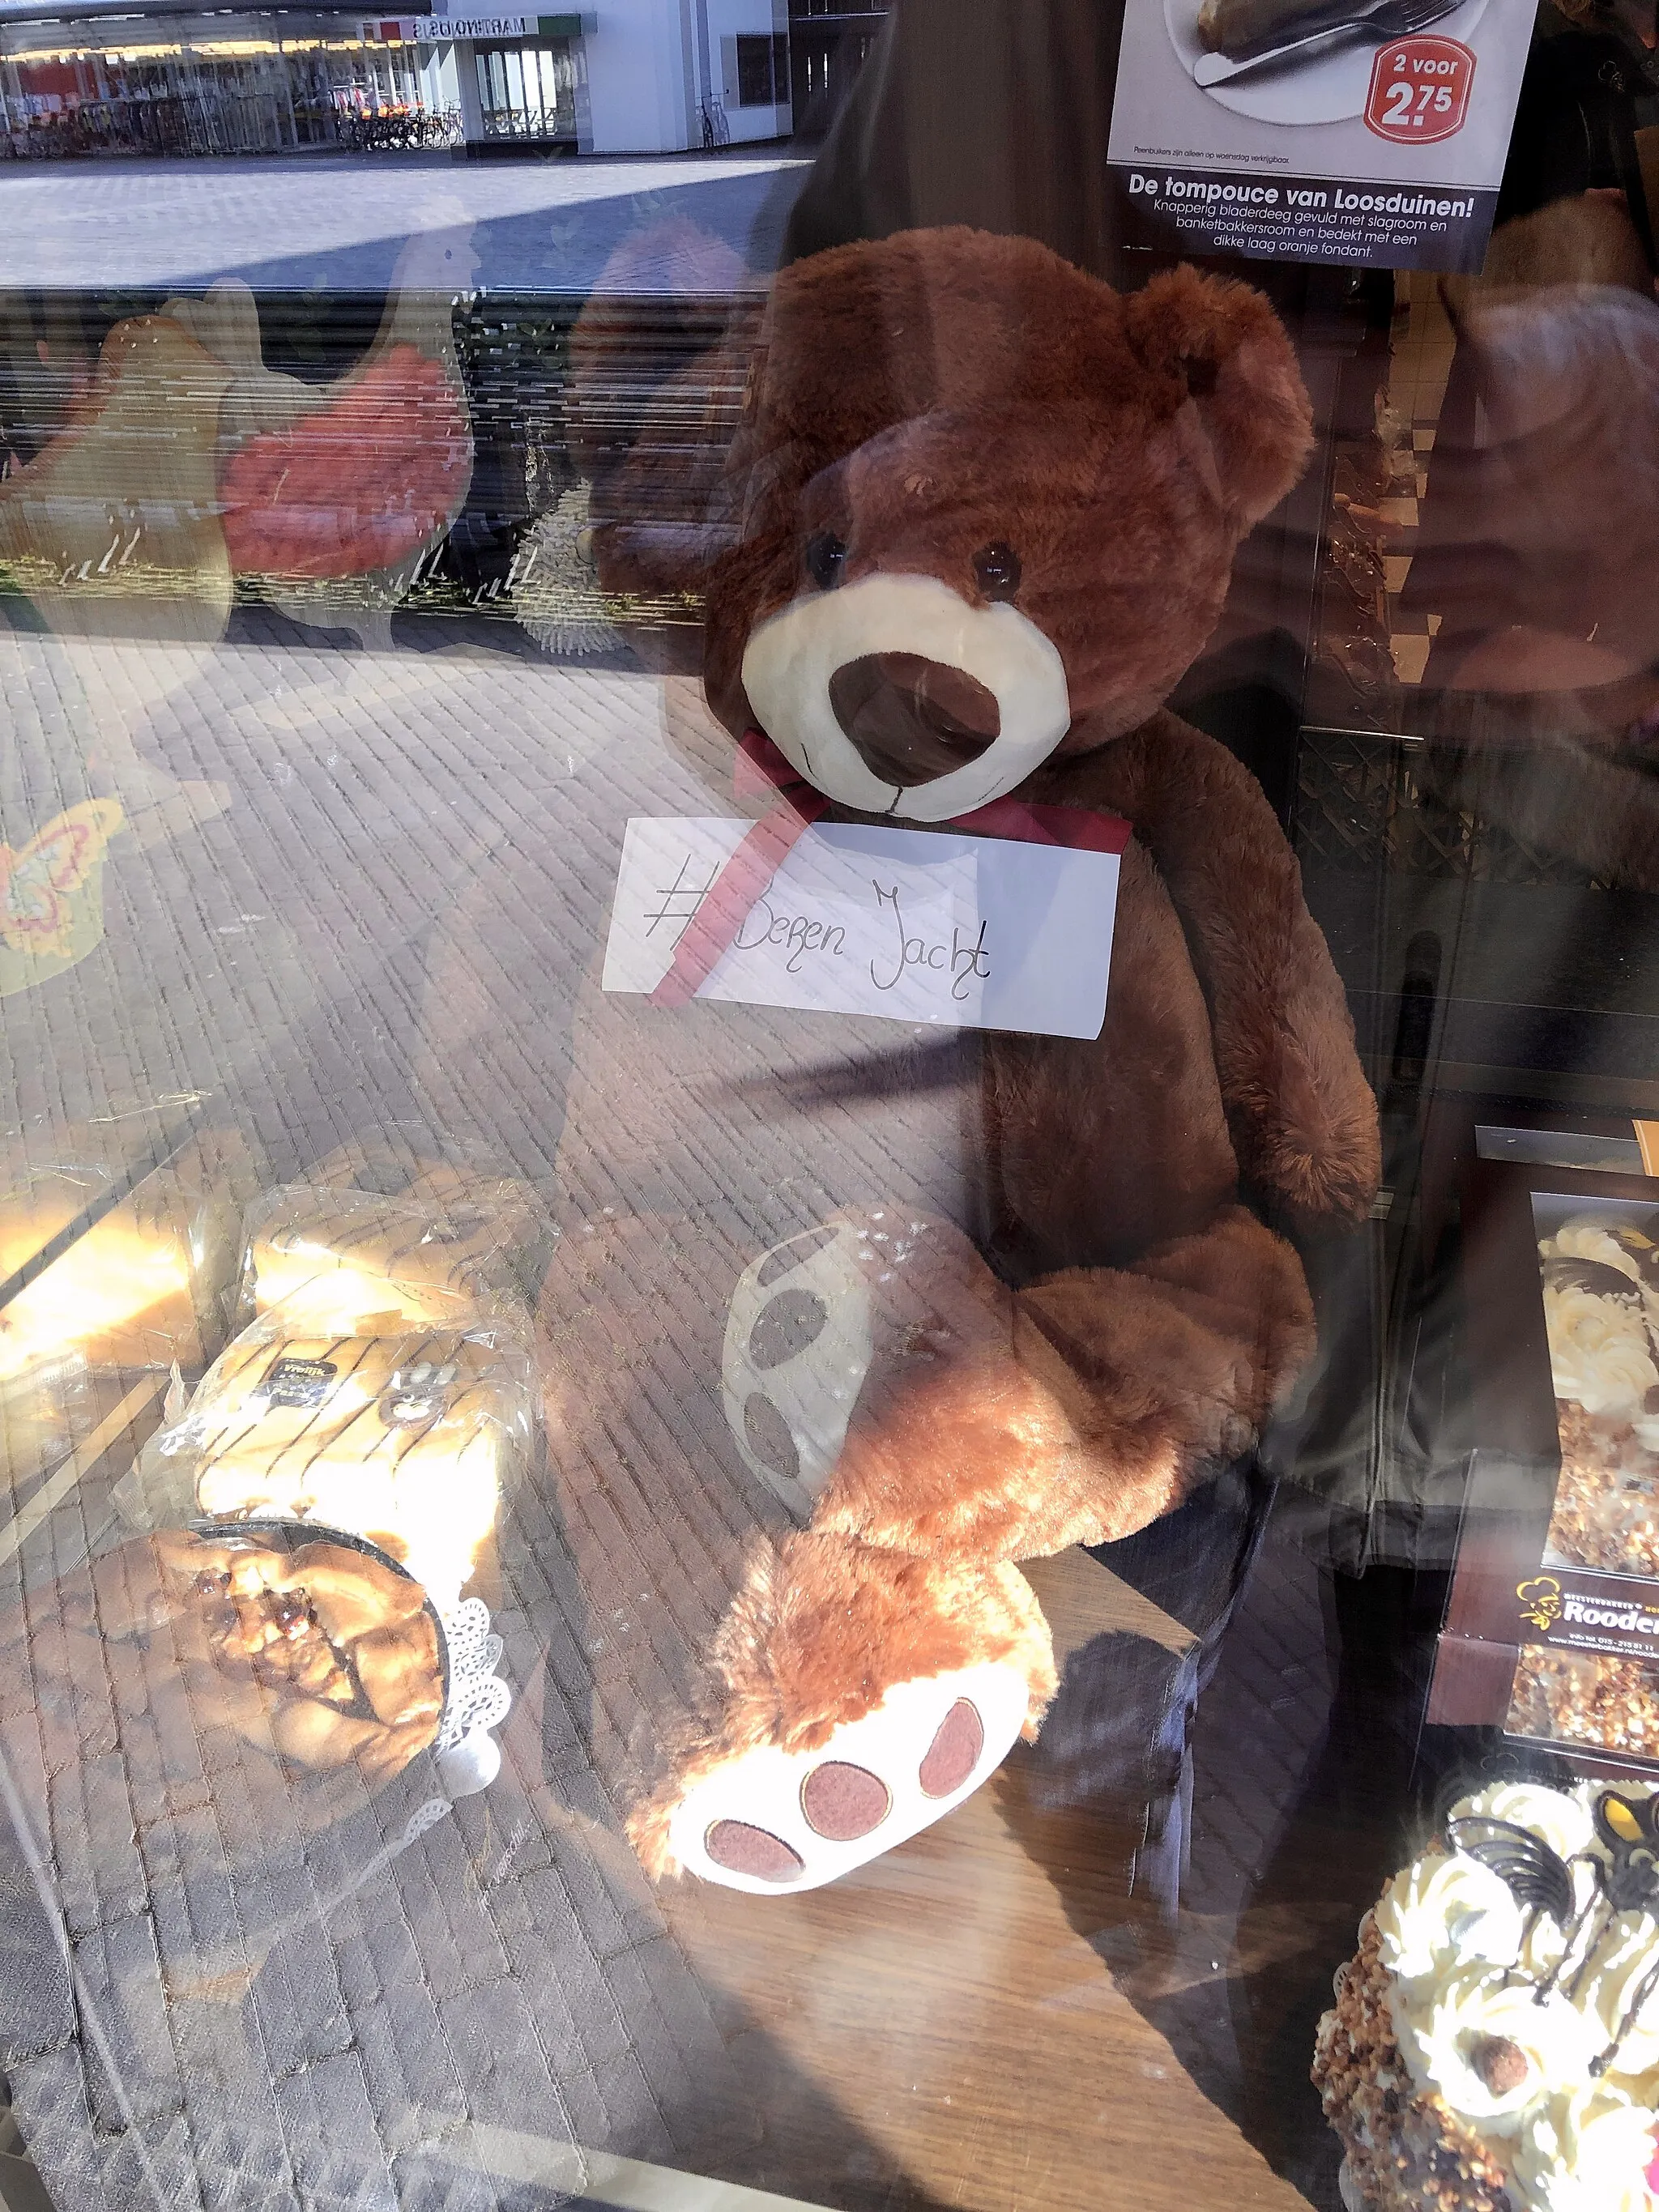 Photo showing: Teddey bears were being placed in windows in the Netherlands as part of a game - the teddy bear hunt- meant to entertain children (and adults) during the period of coronavirus lockdowns and social distancing. The game is said to have been inspired by the 1989 children’s book “We’re Going on a Bear Hunt,” written by Michael Rosen and illustrated by Helen Oxenbury.